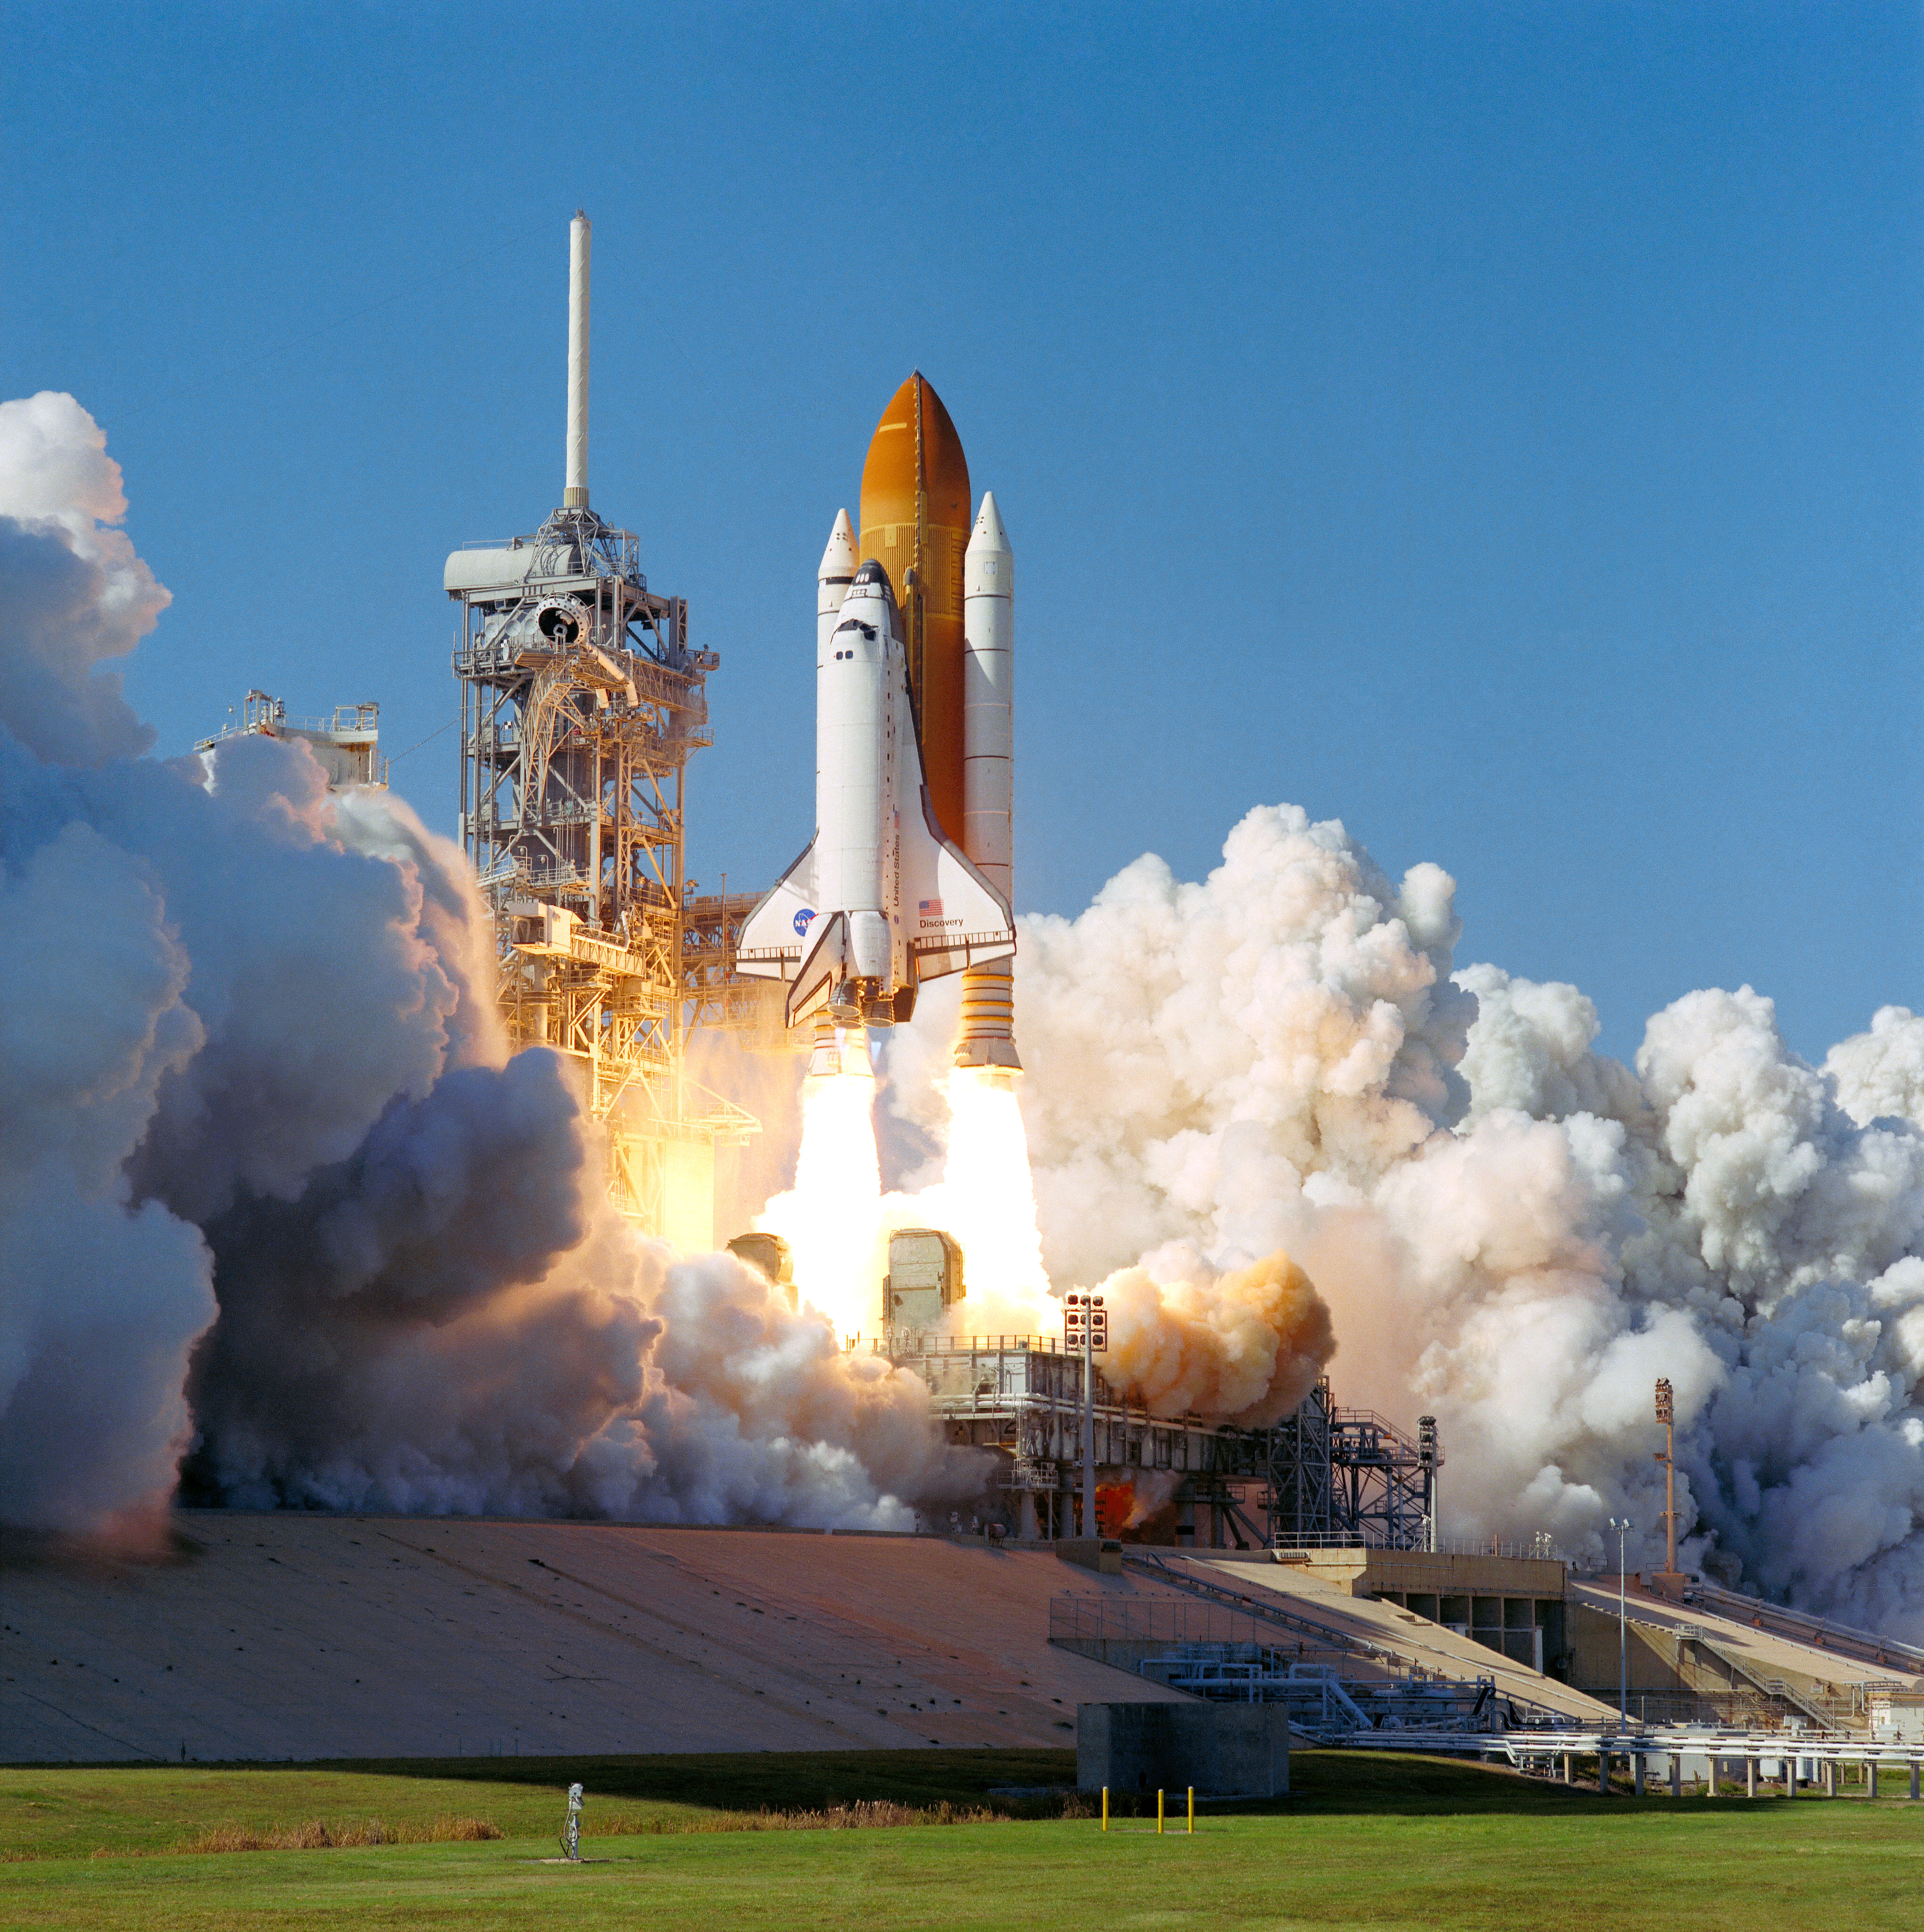 Liftoff of space shuttle Discovery on the STS-95 mission, returning Glenn to orbit